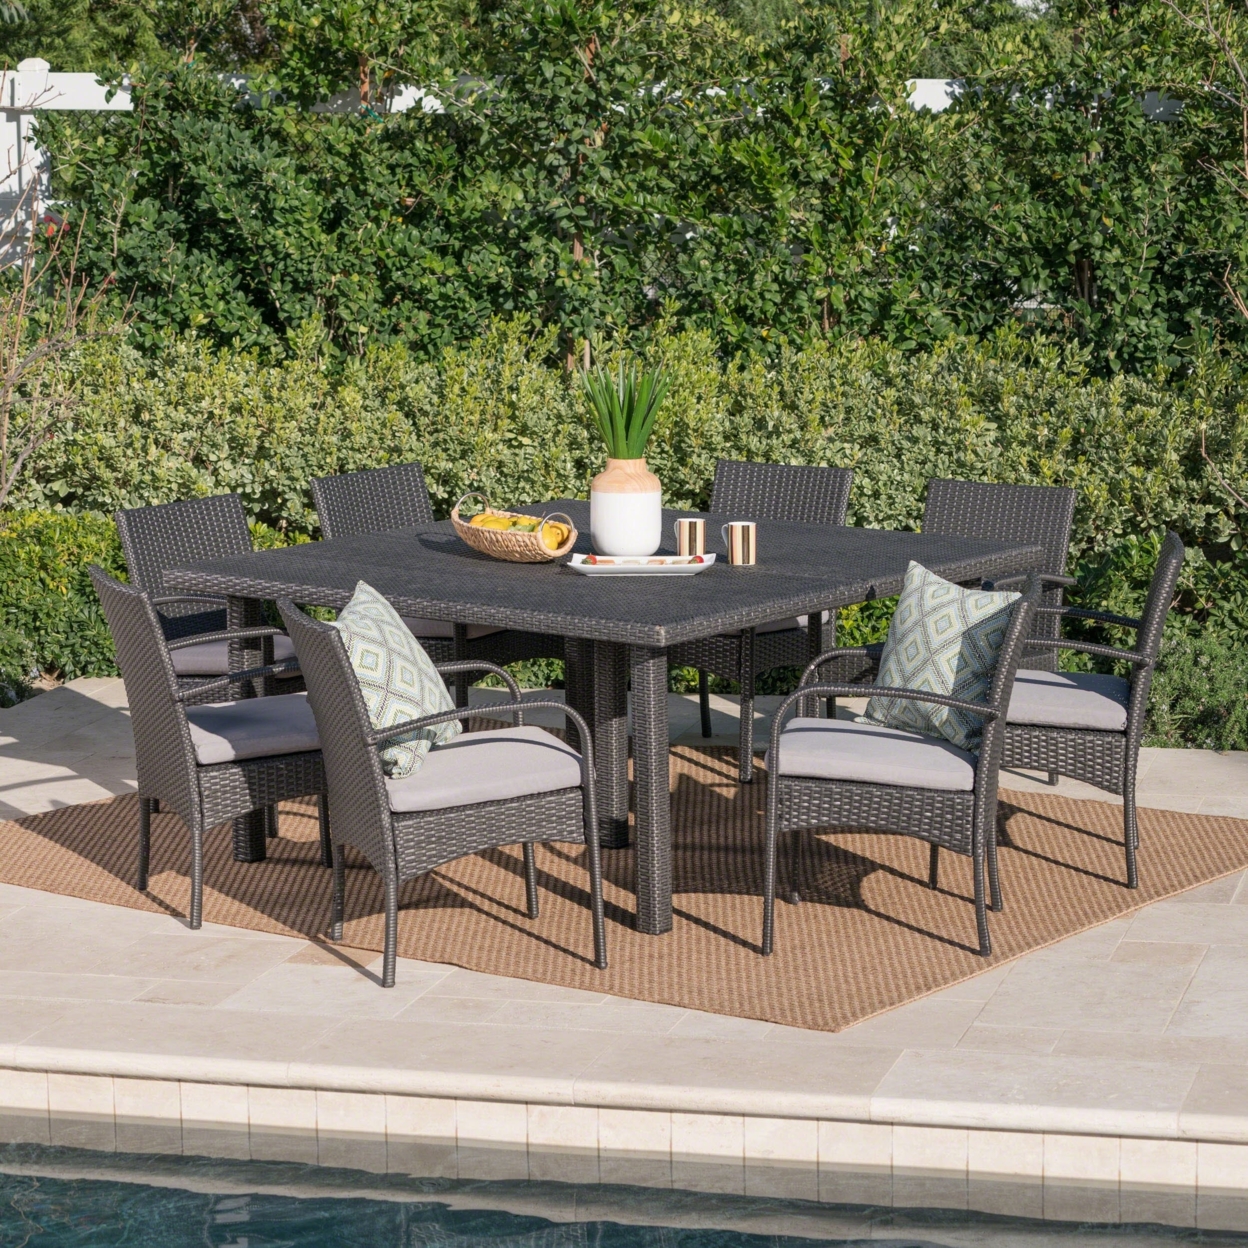 Coral Outdoor 9 Piece Wicker Dining Set With Water Resistant Cushions - Gray/gray